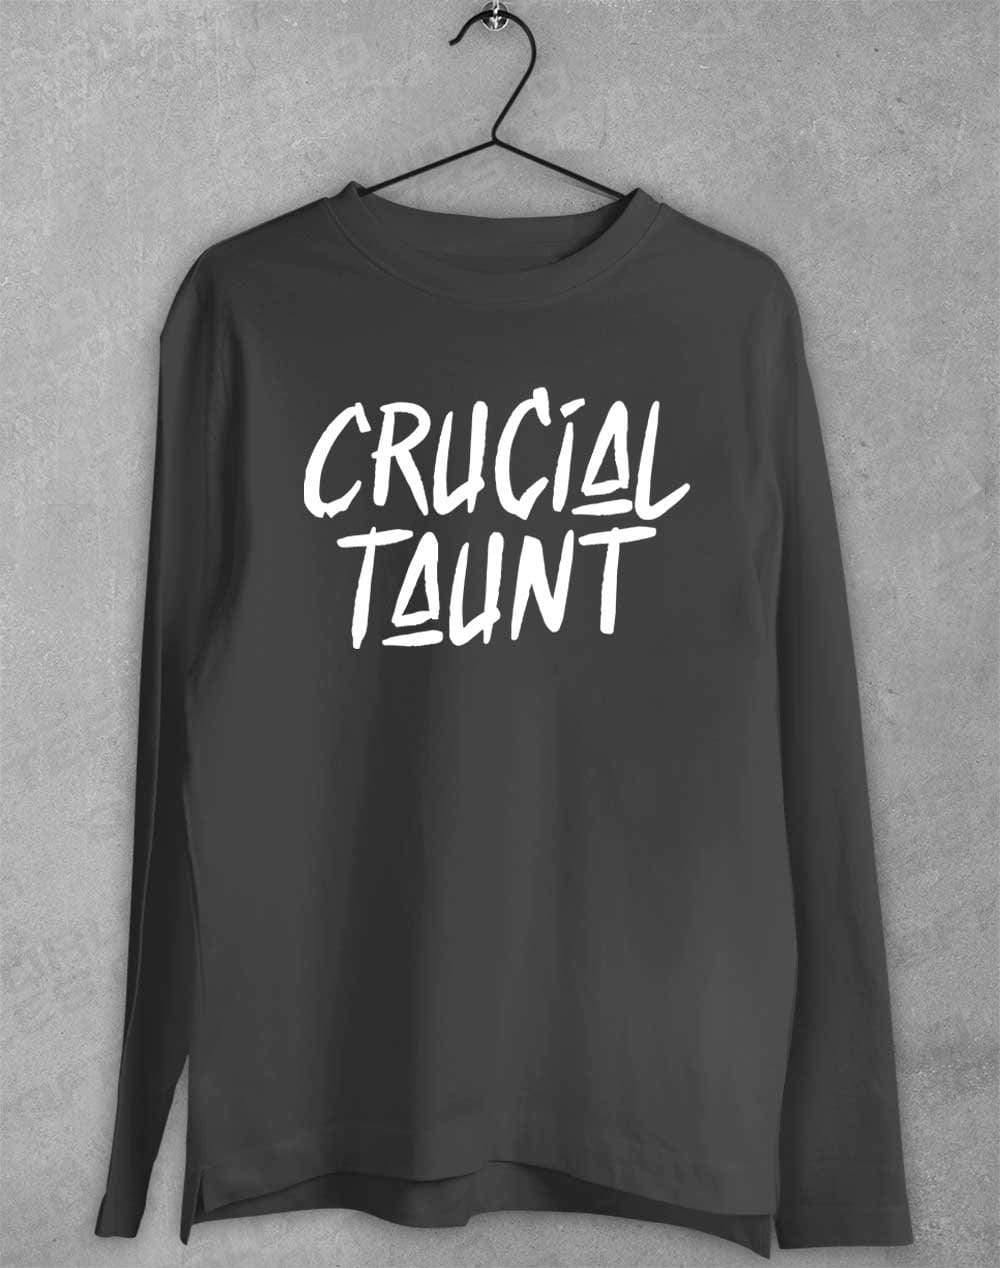 Crucial Taunt Long Sleeve T-Shirt S / Charcoal  - Off World Tees